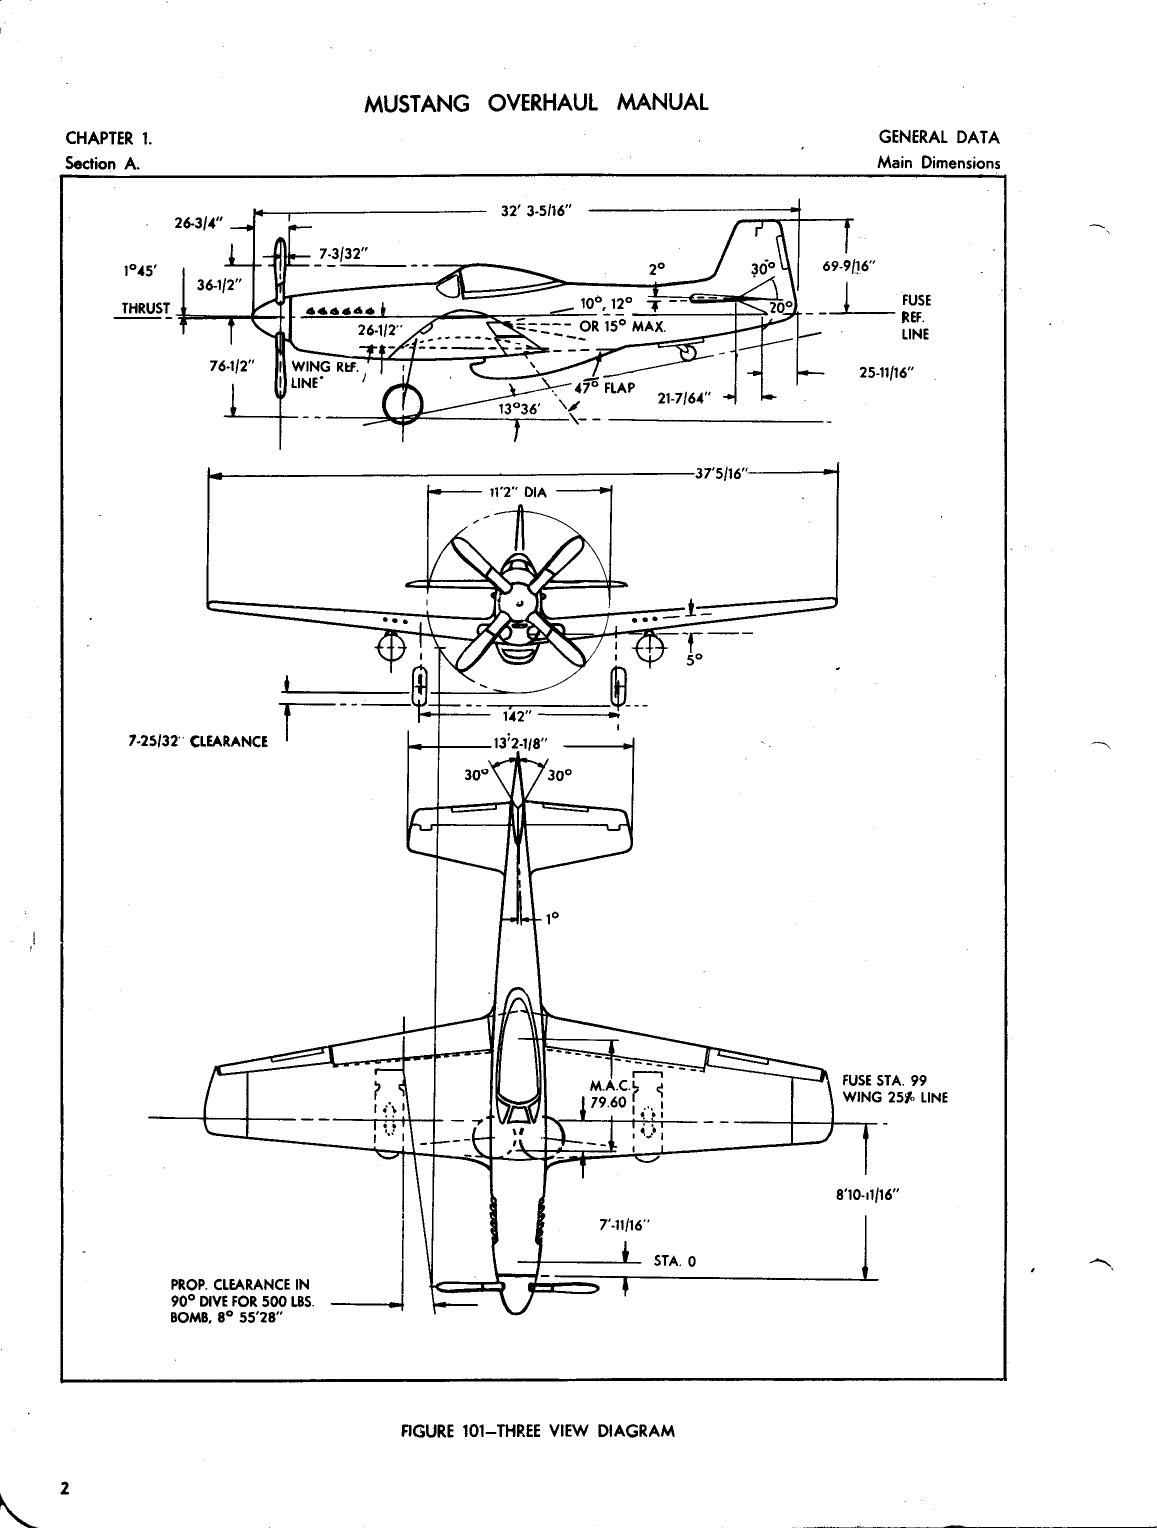 Sample page 8 from AirCorps Library document: Mustang Overhaul Manual (Mark 20-21)